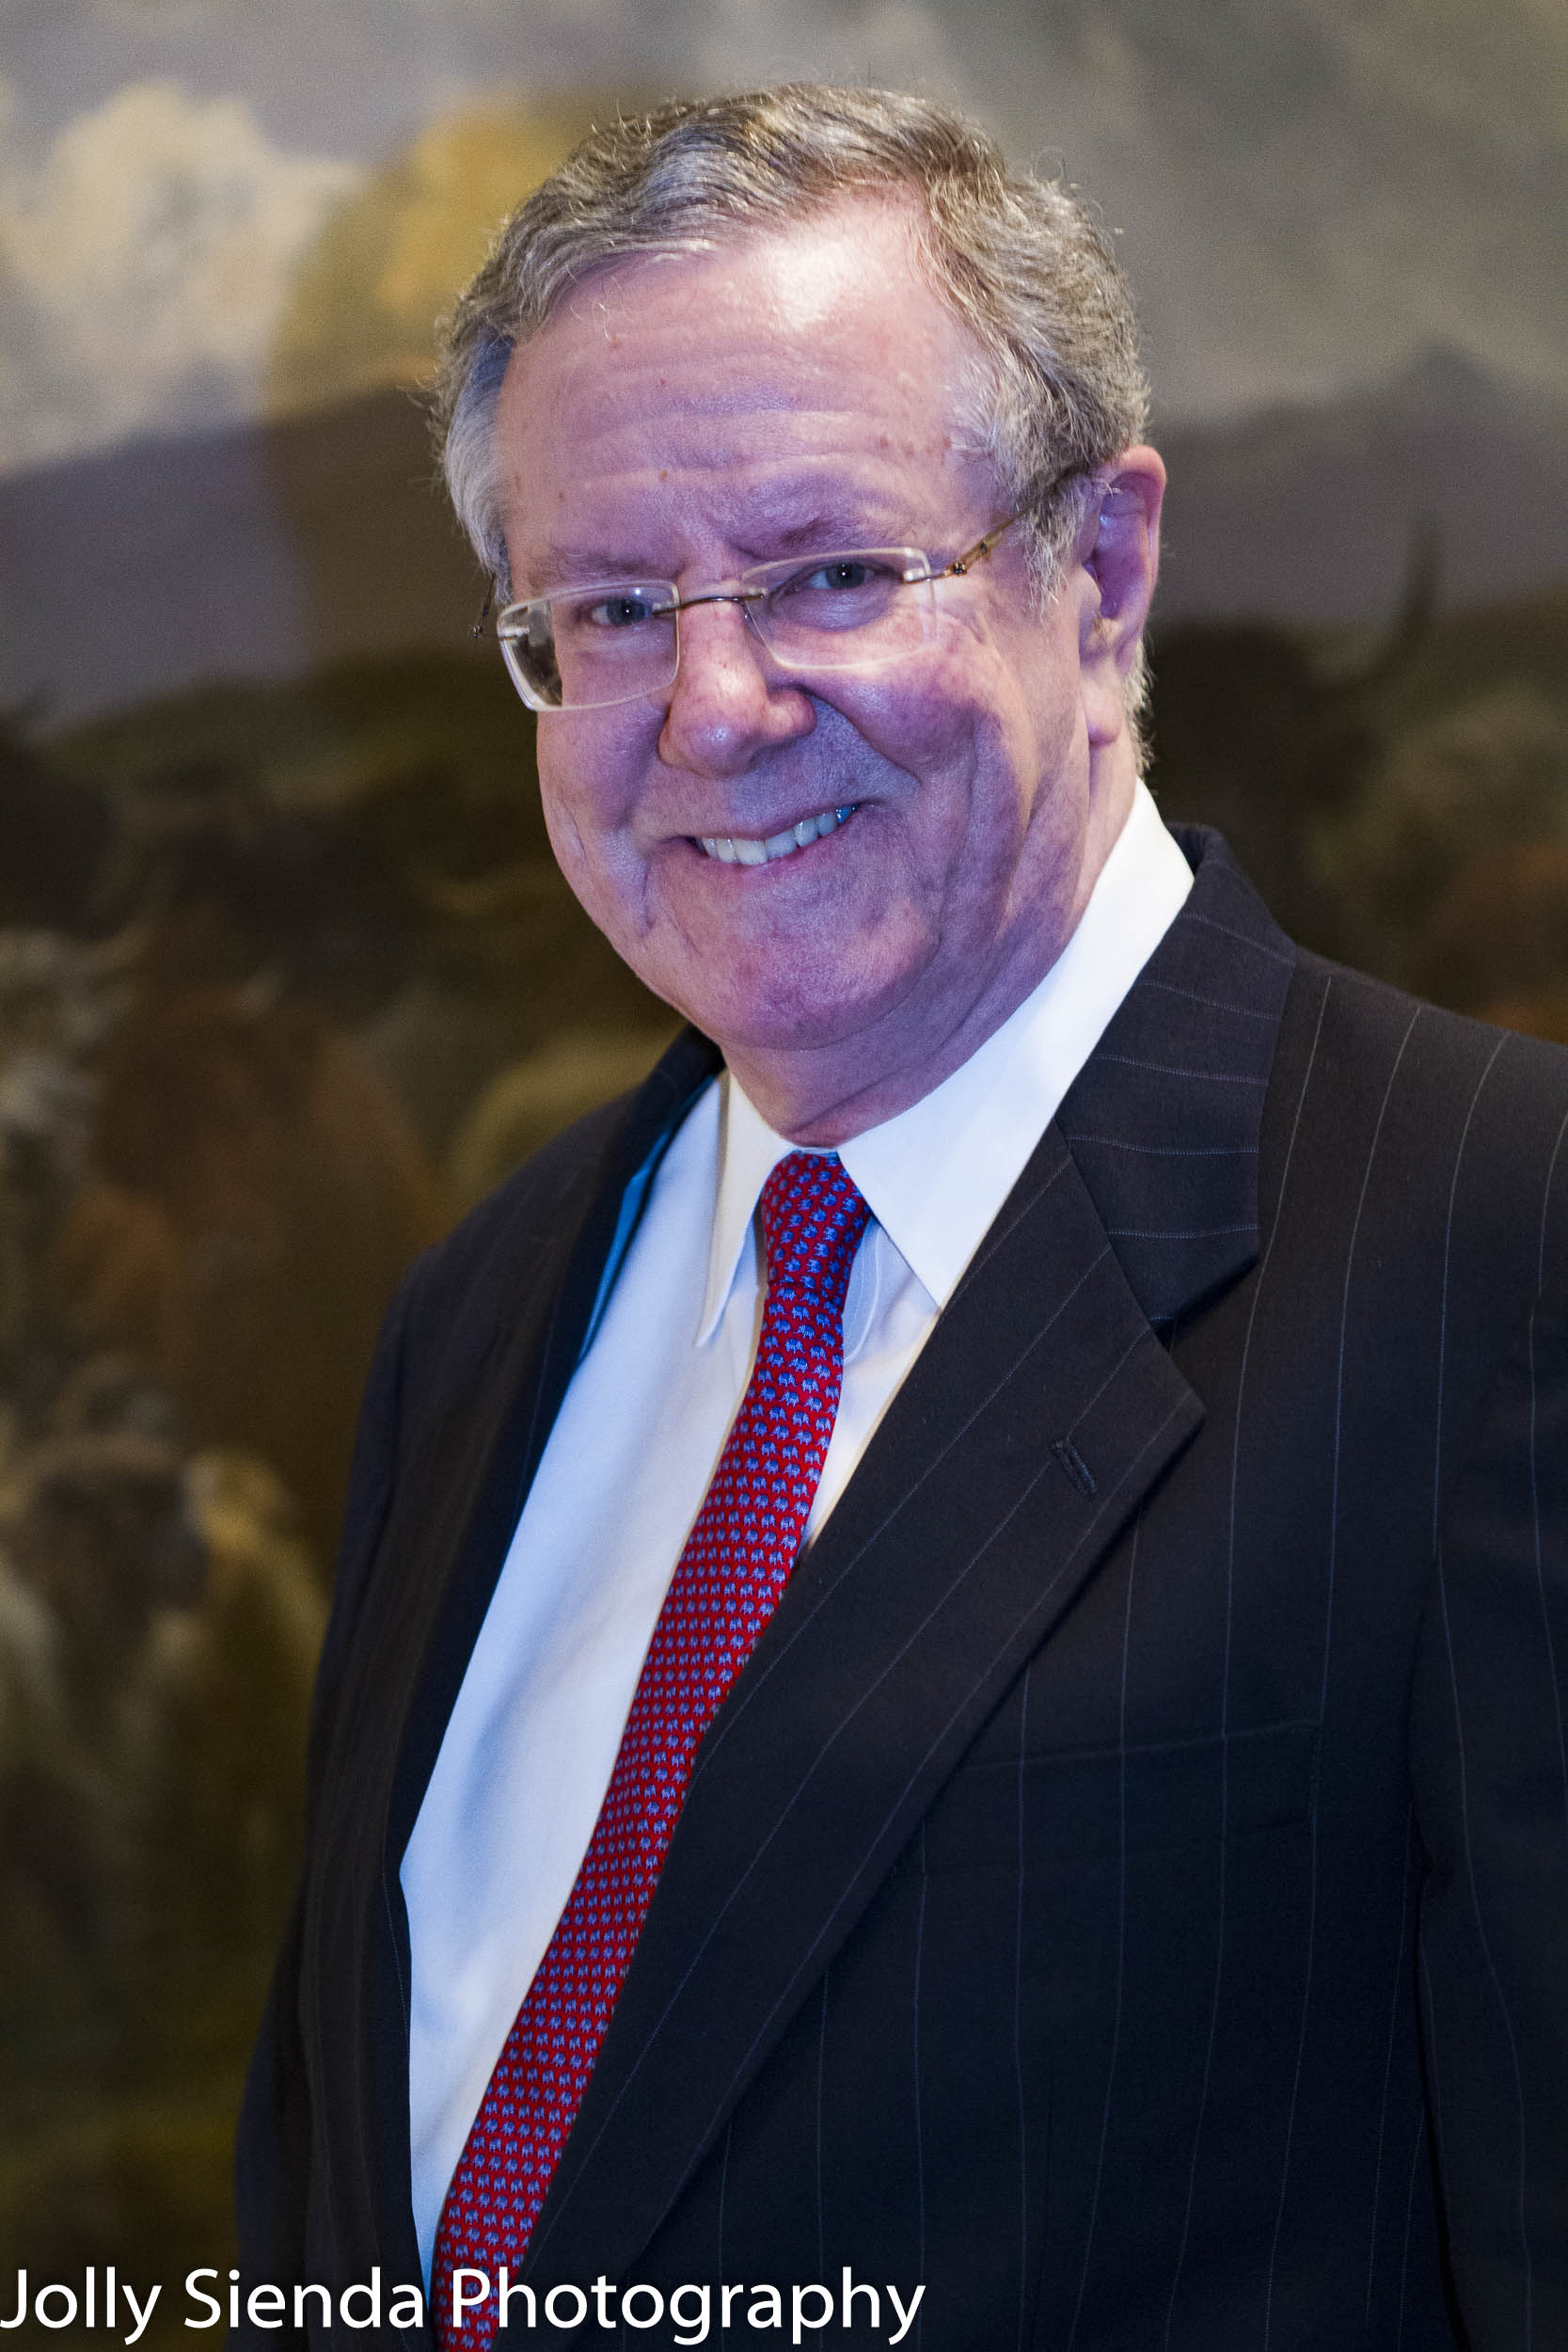 Steve Forbes, American Publishing Executive, and former Republic